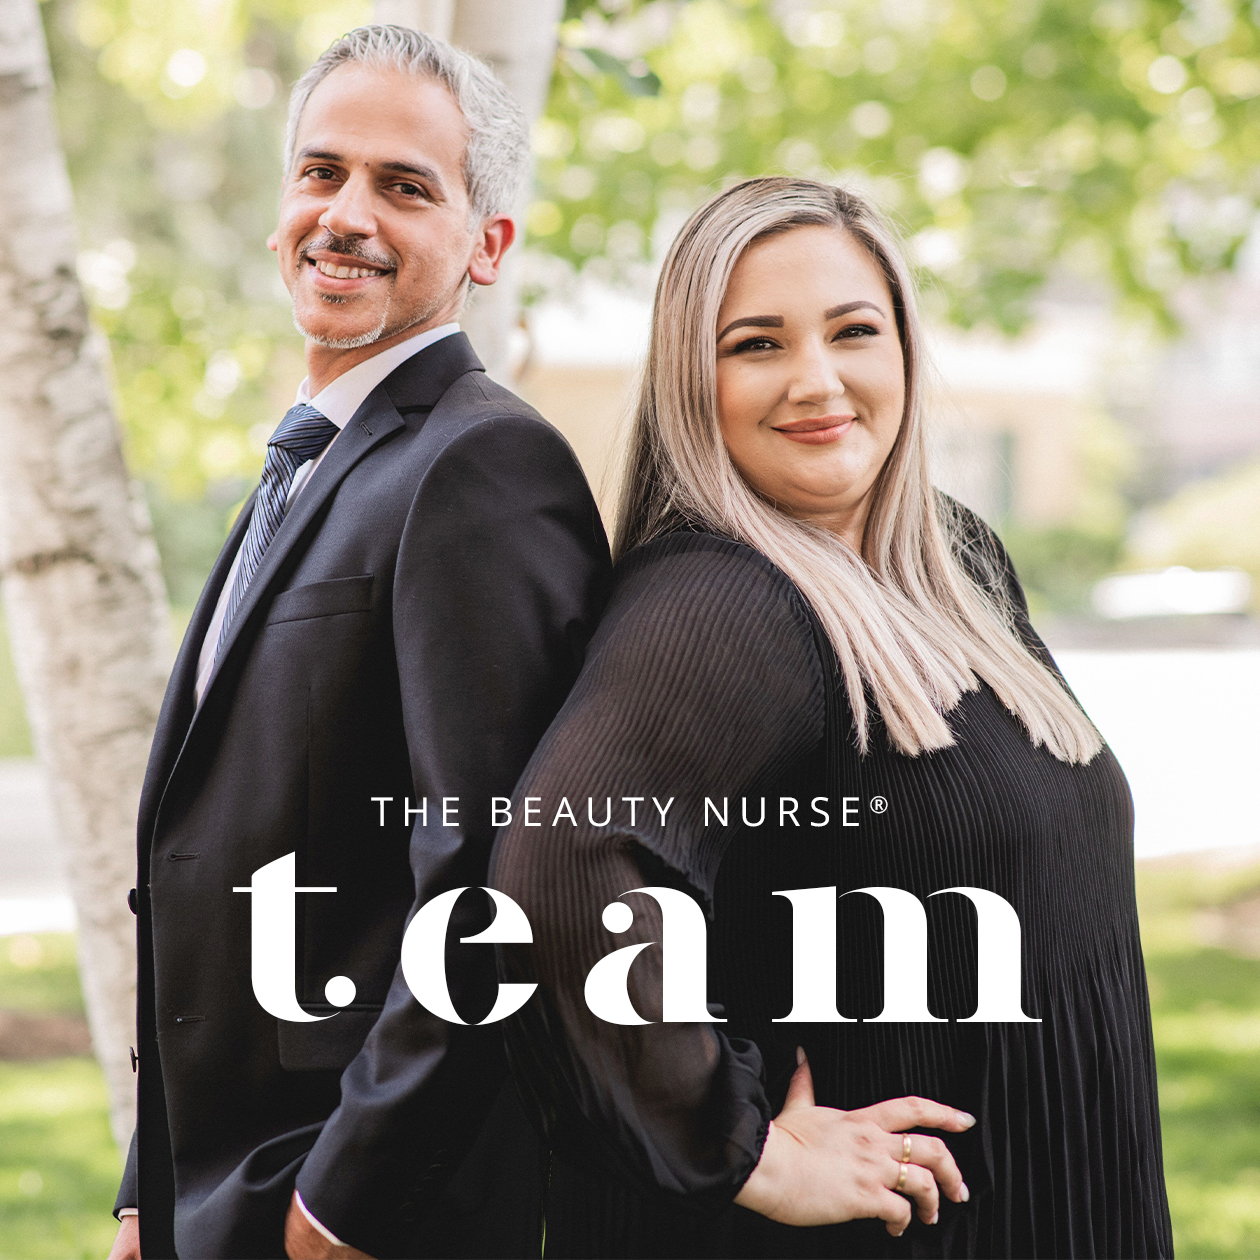 The Beauty Nurse Team Majid and Natalie standing together